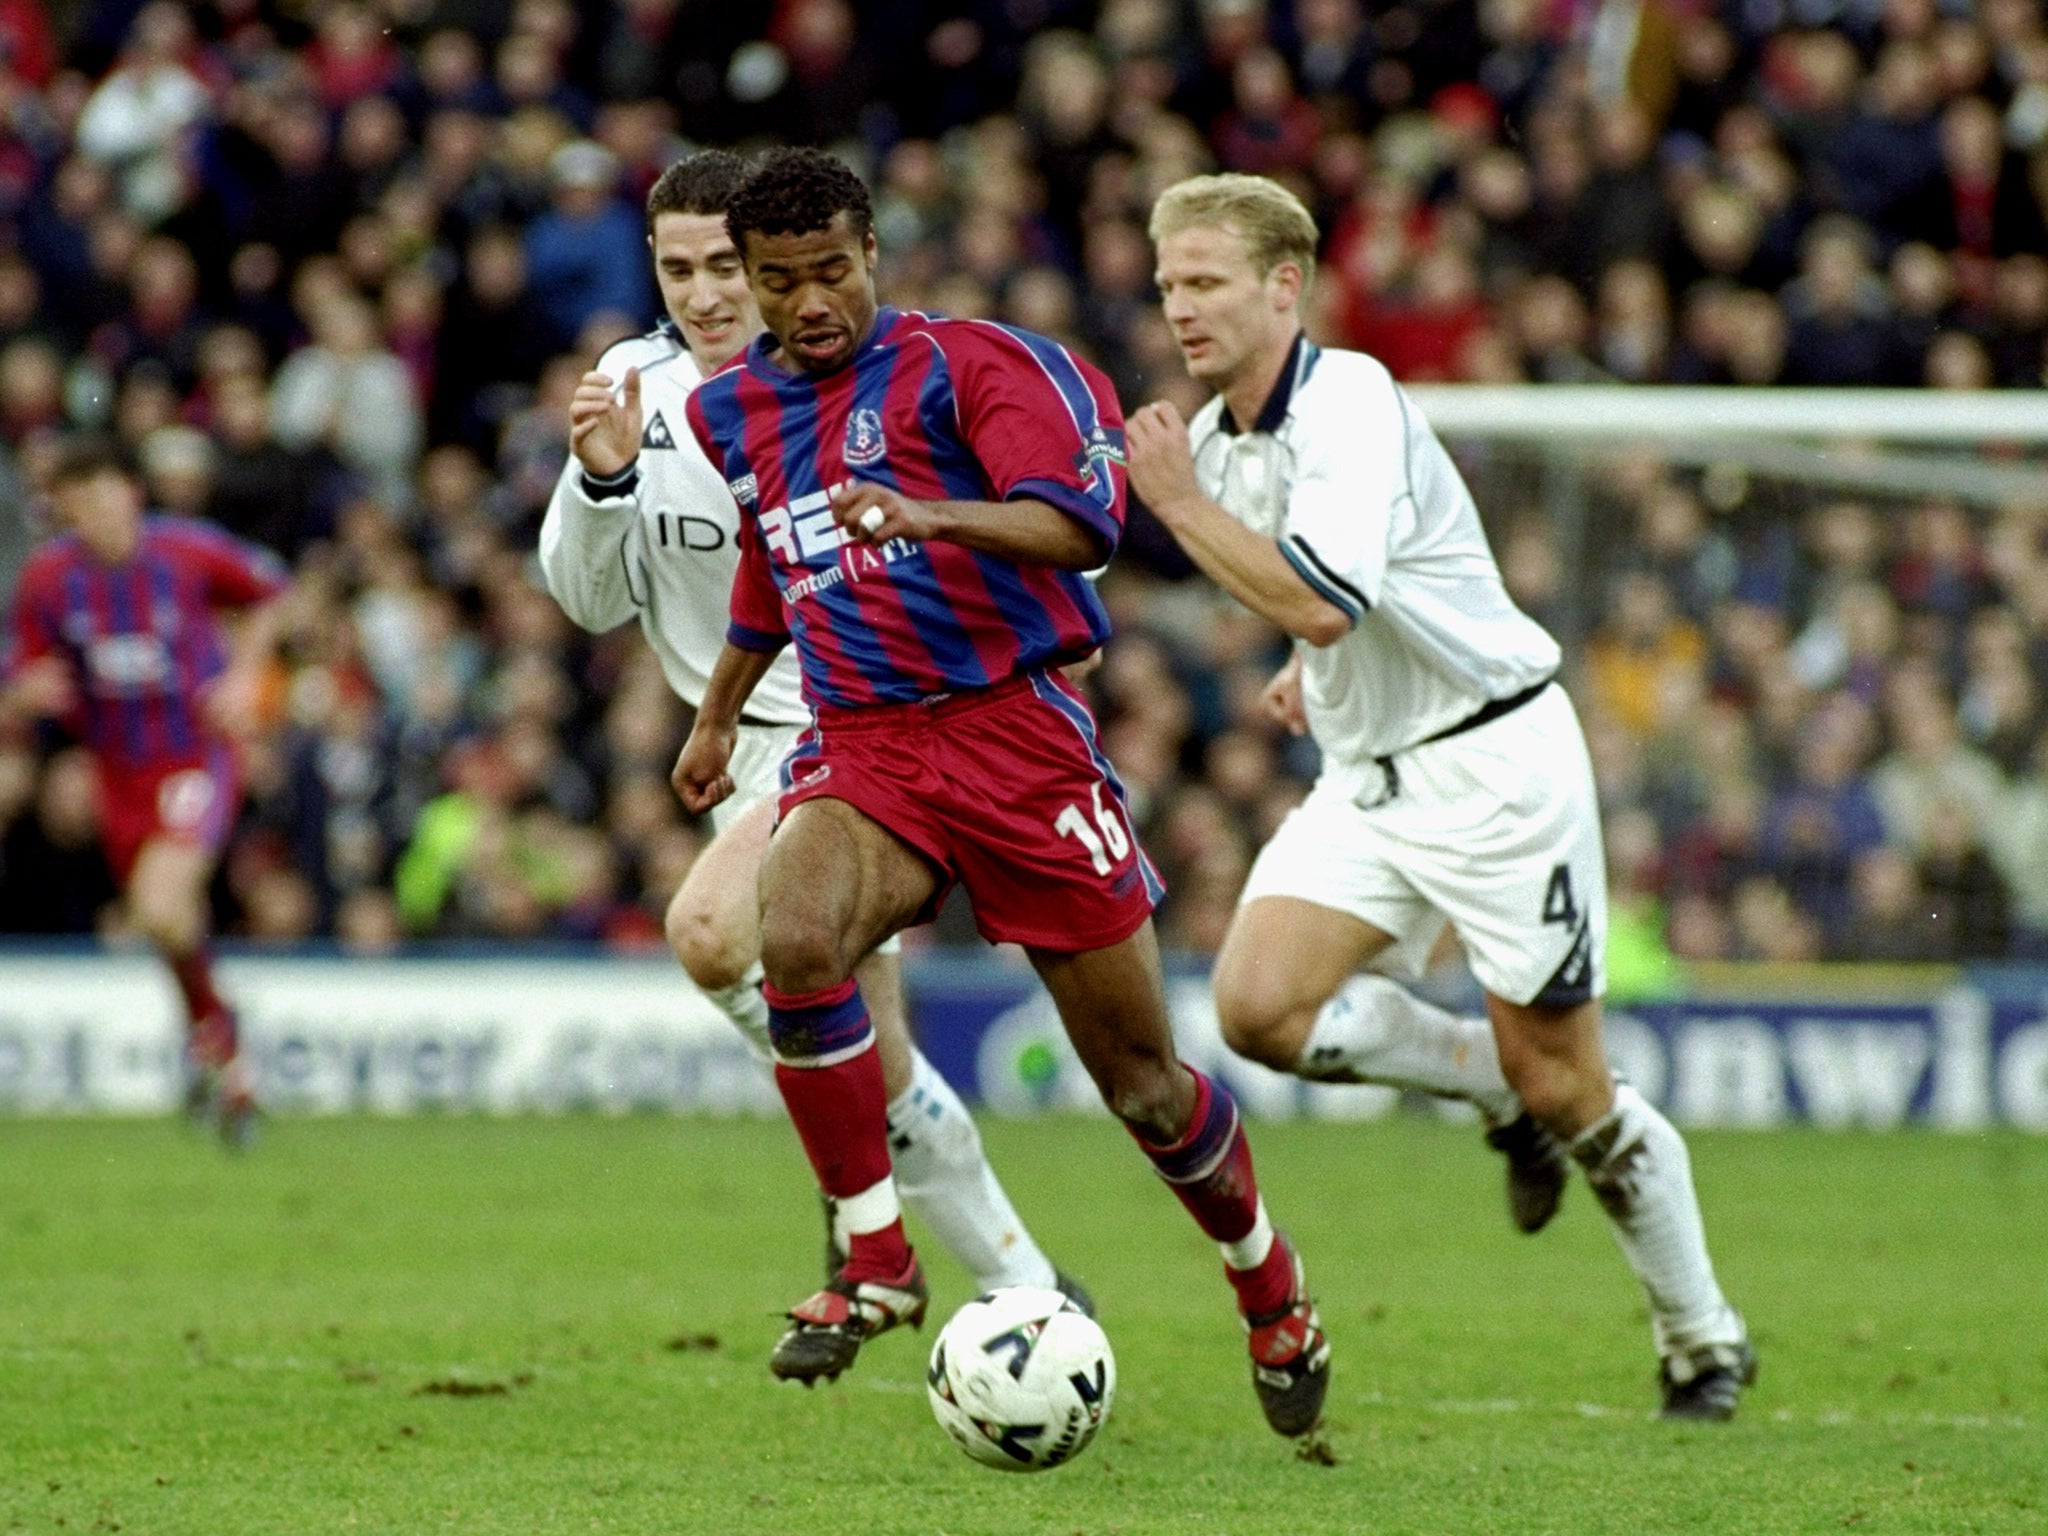 Cole was on loan at Selhurst Park in 2000